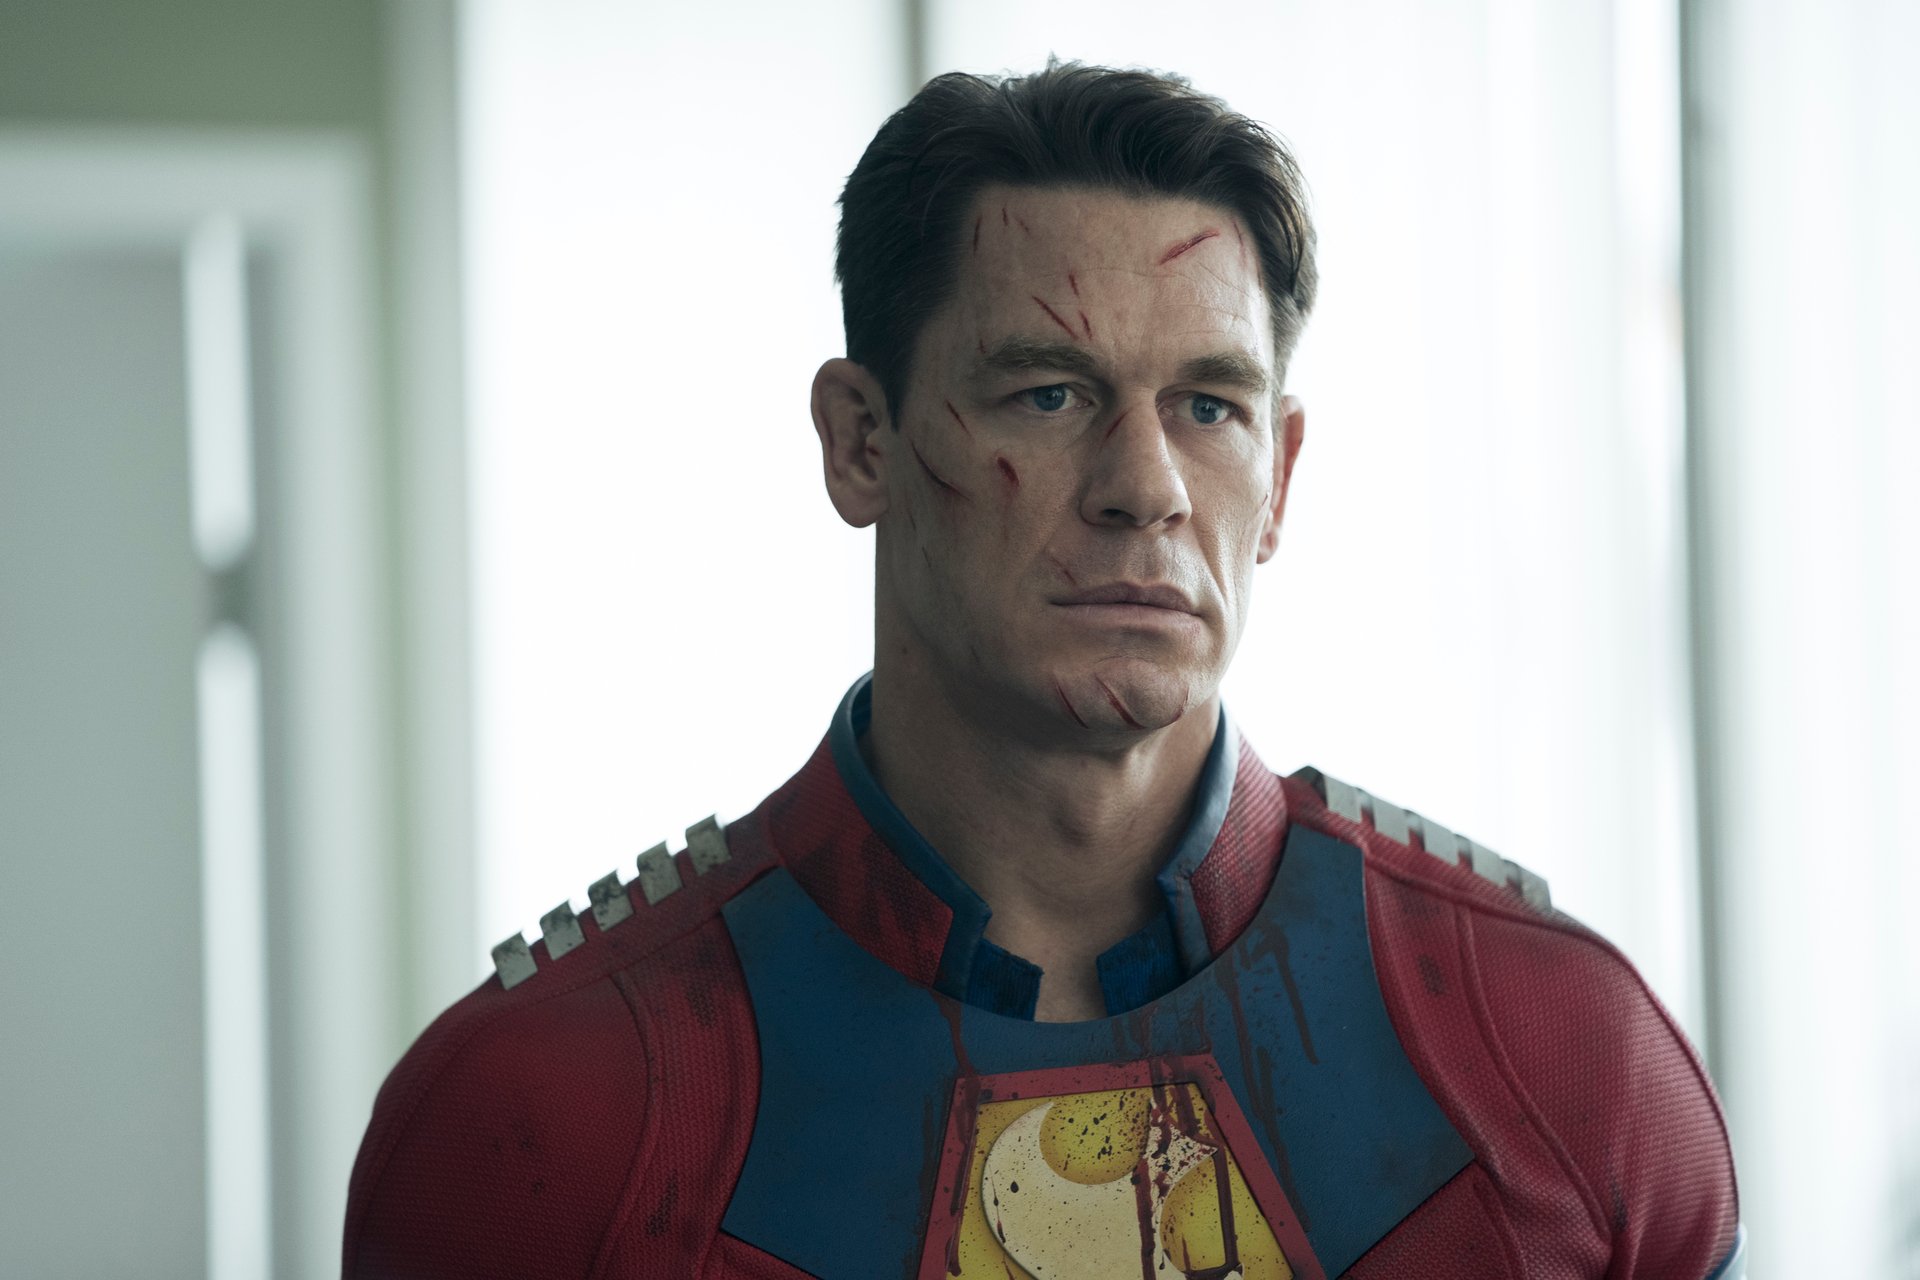 John Cena as Christopher Smith in DC's 'Peacemaker.' His face has a number of cuts on it, and he looks grim.